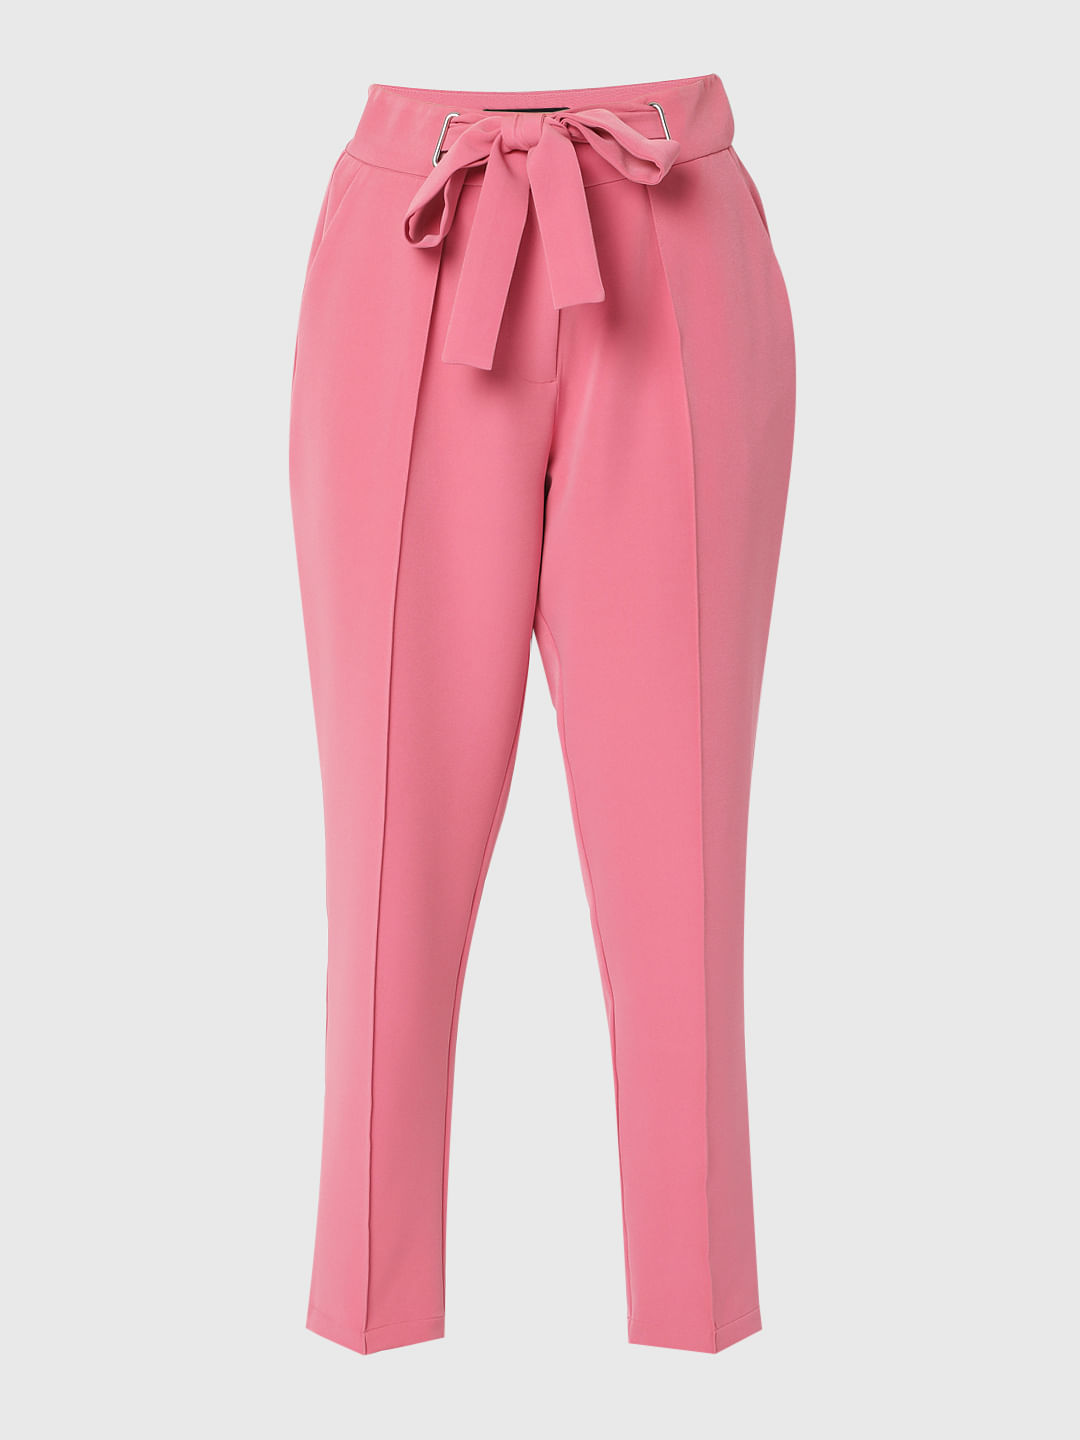 NWT $700 Burberry Straight Wool Blend Tailored Trouser Pant Pink Sz 6 US |  eBay